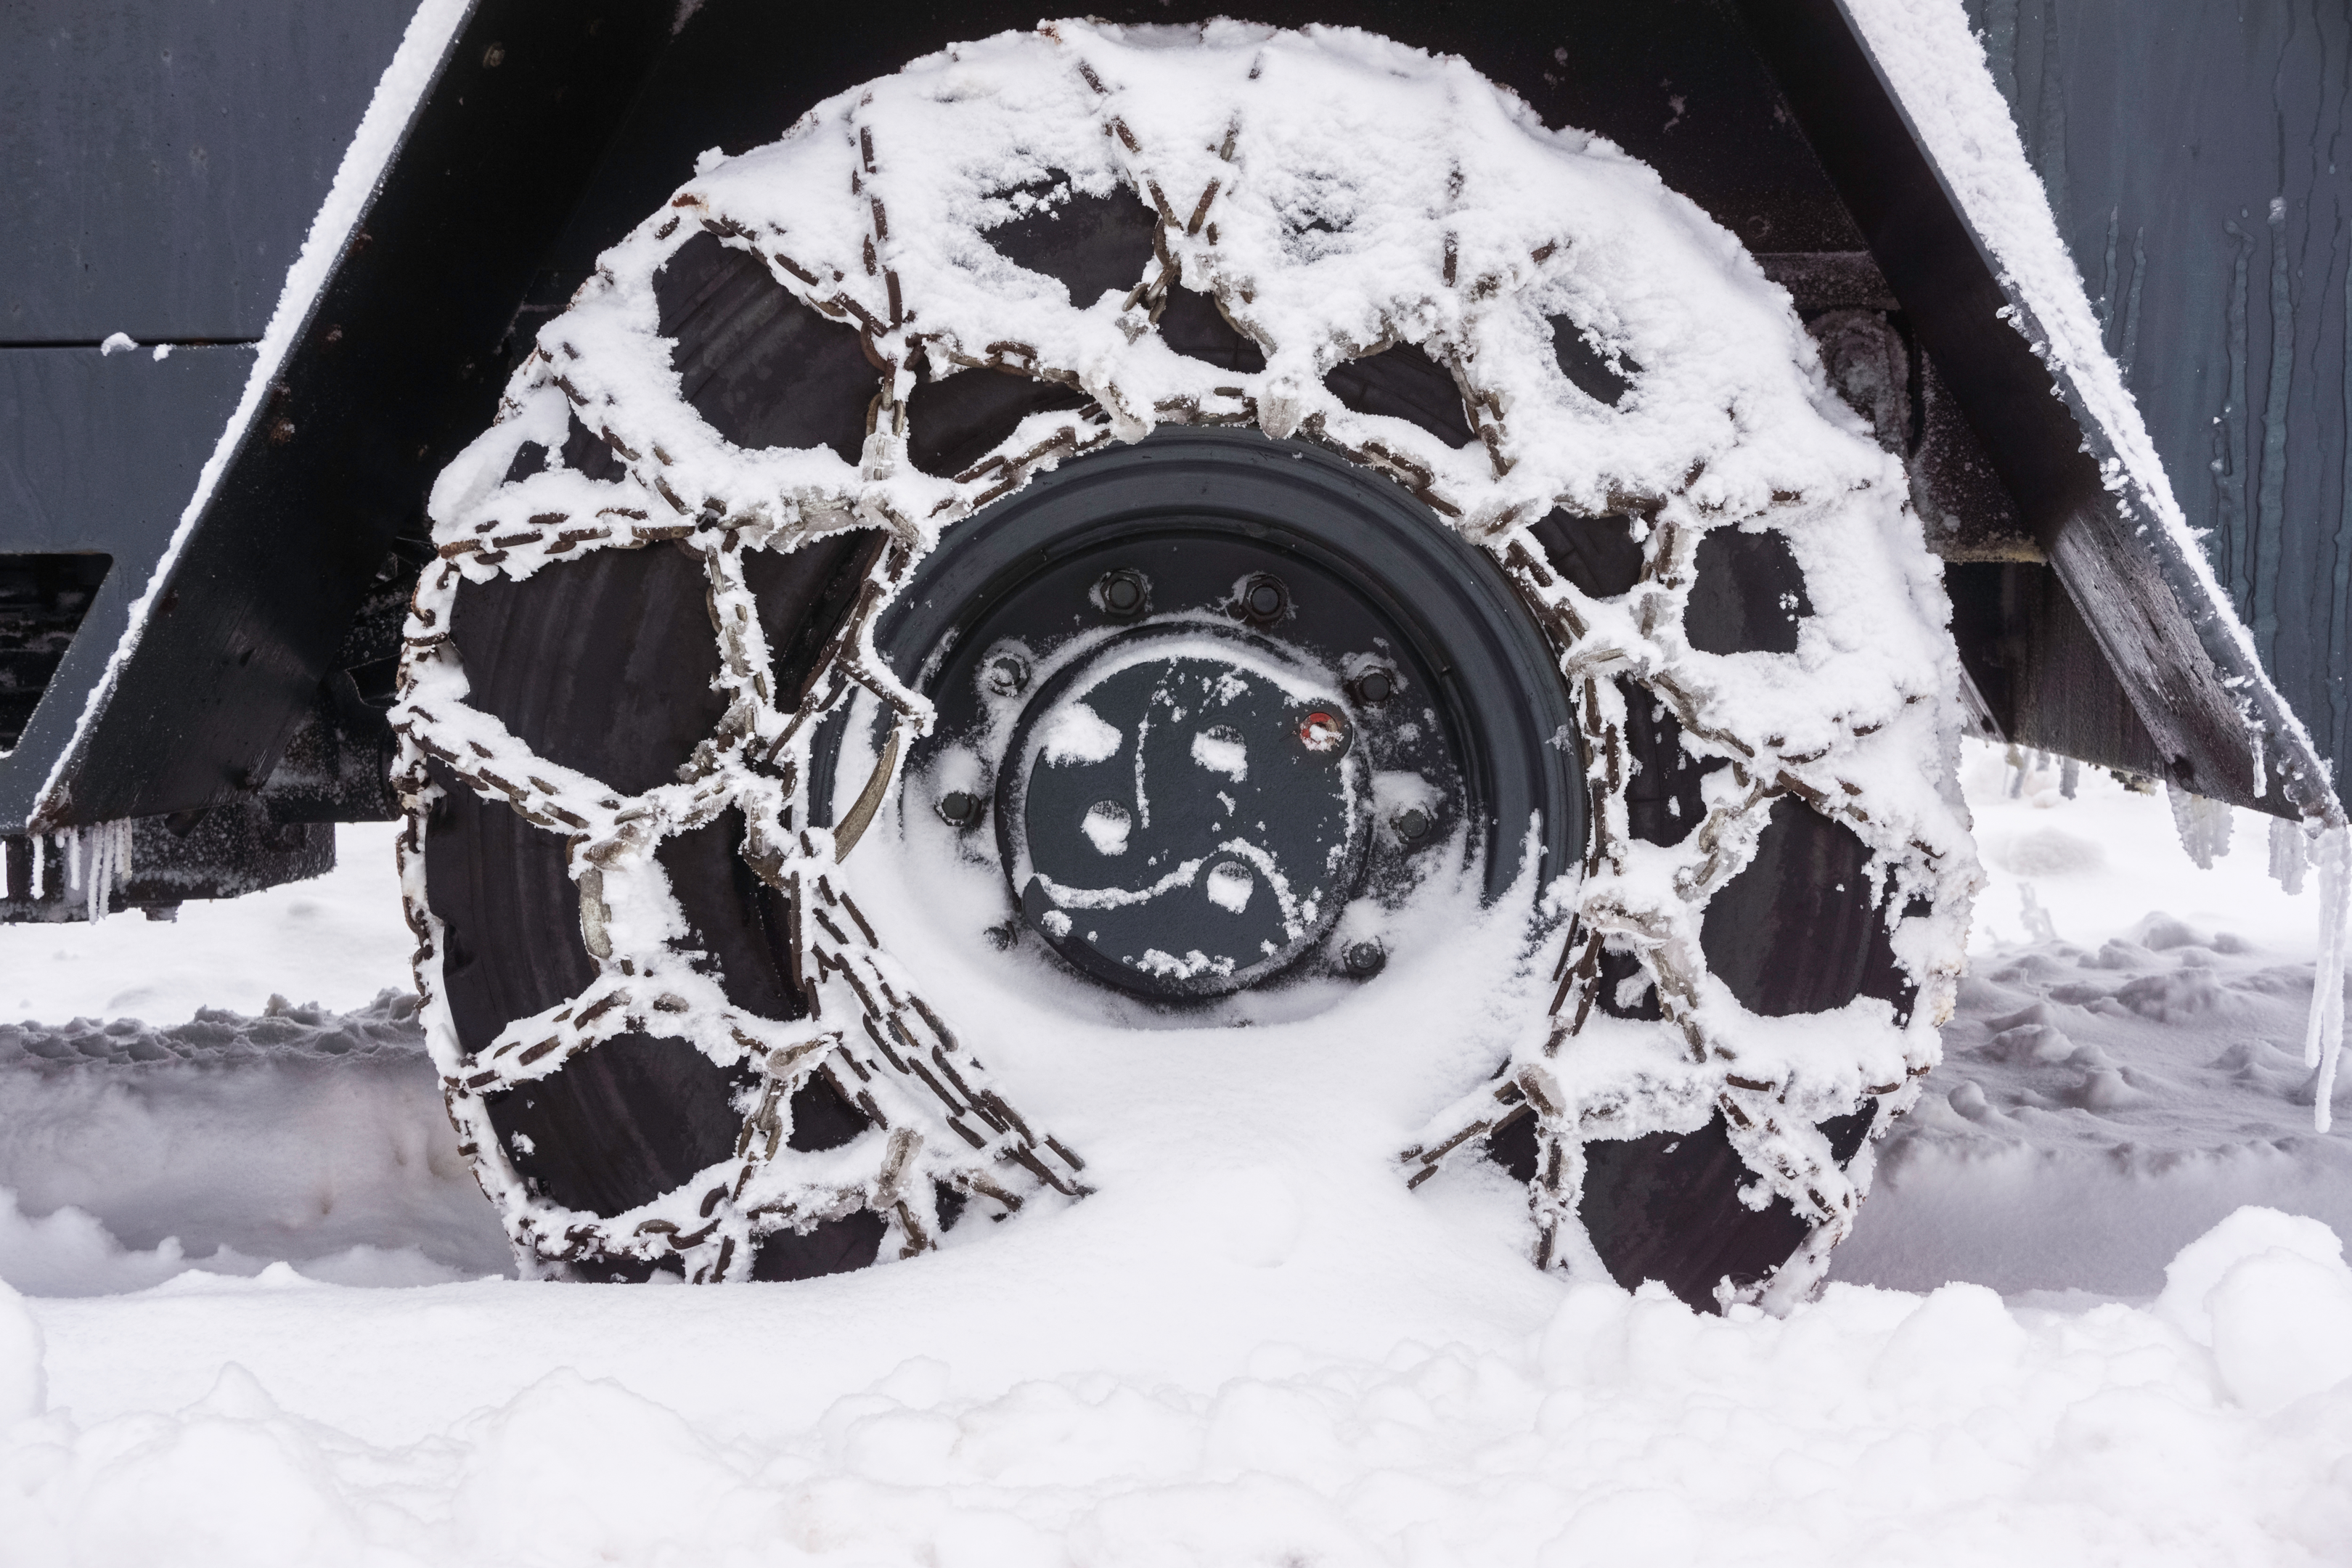 Winter Driving Tip: Prepare your snow tires with chains.